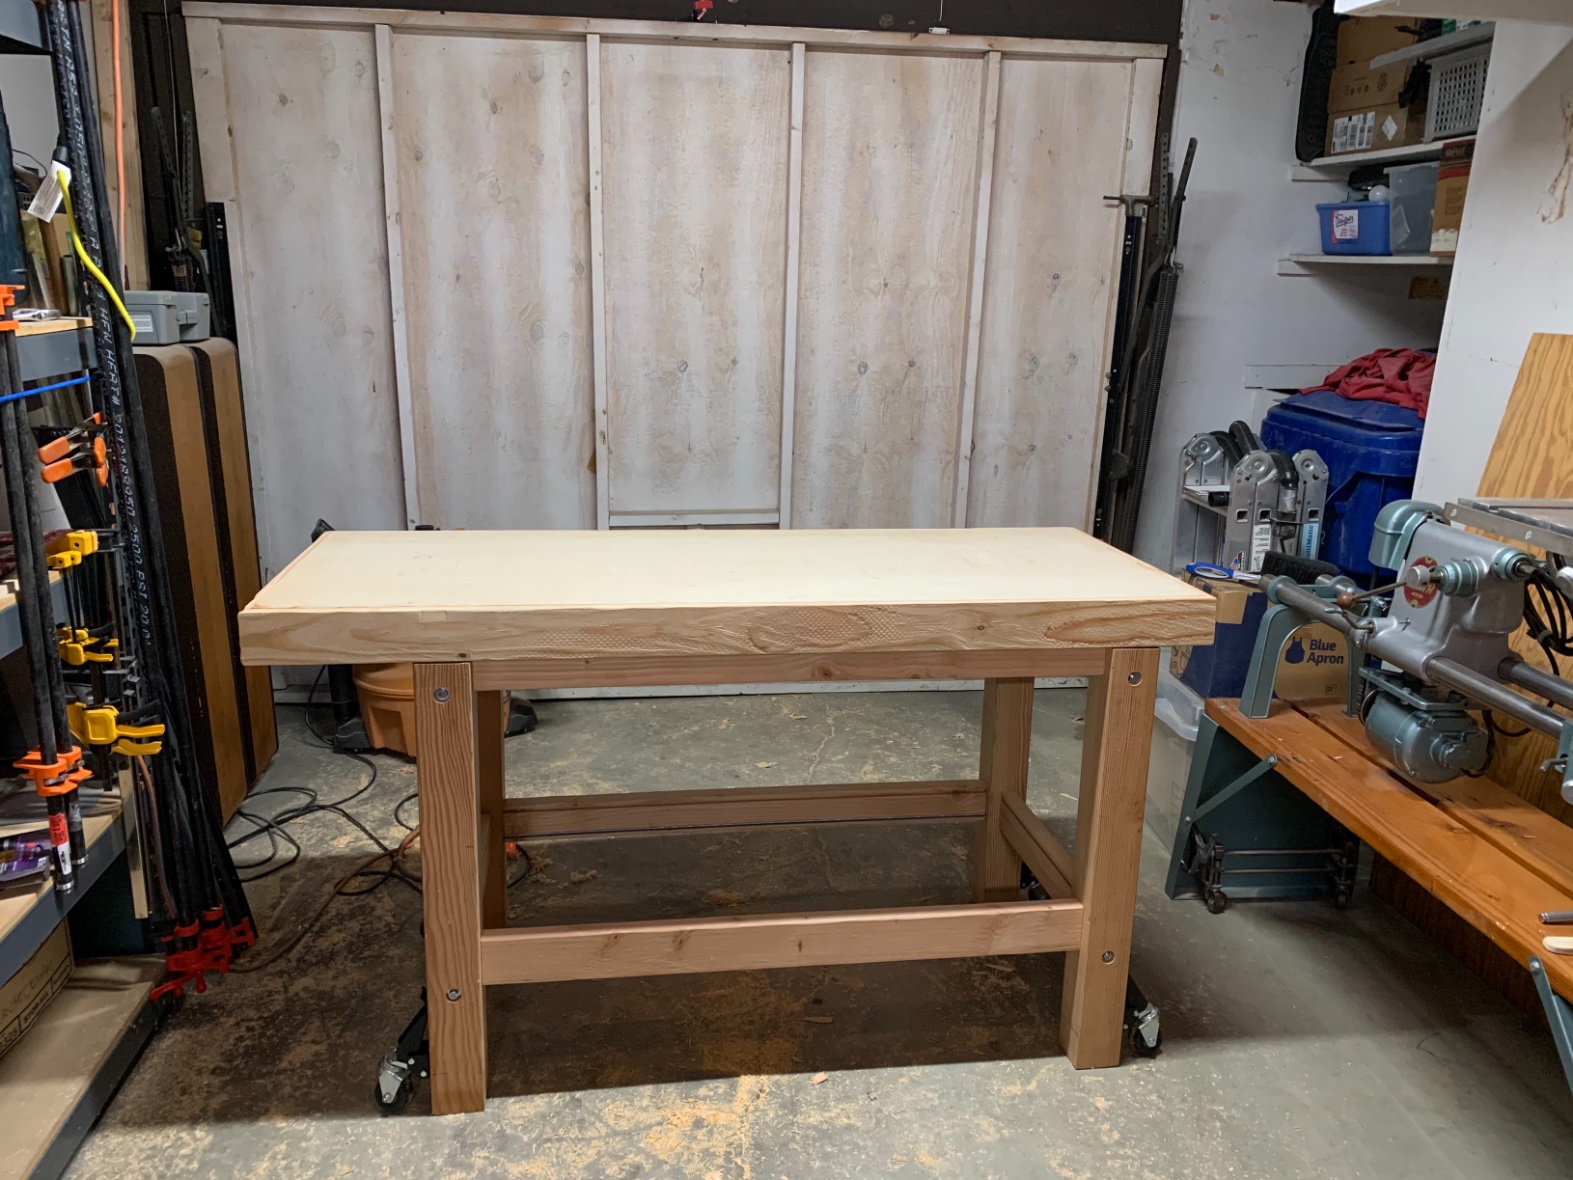 Woodworking bench almost completed, but already helpful